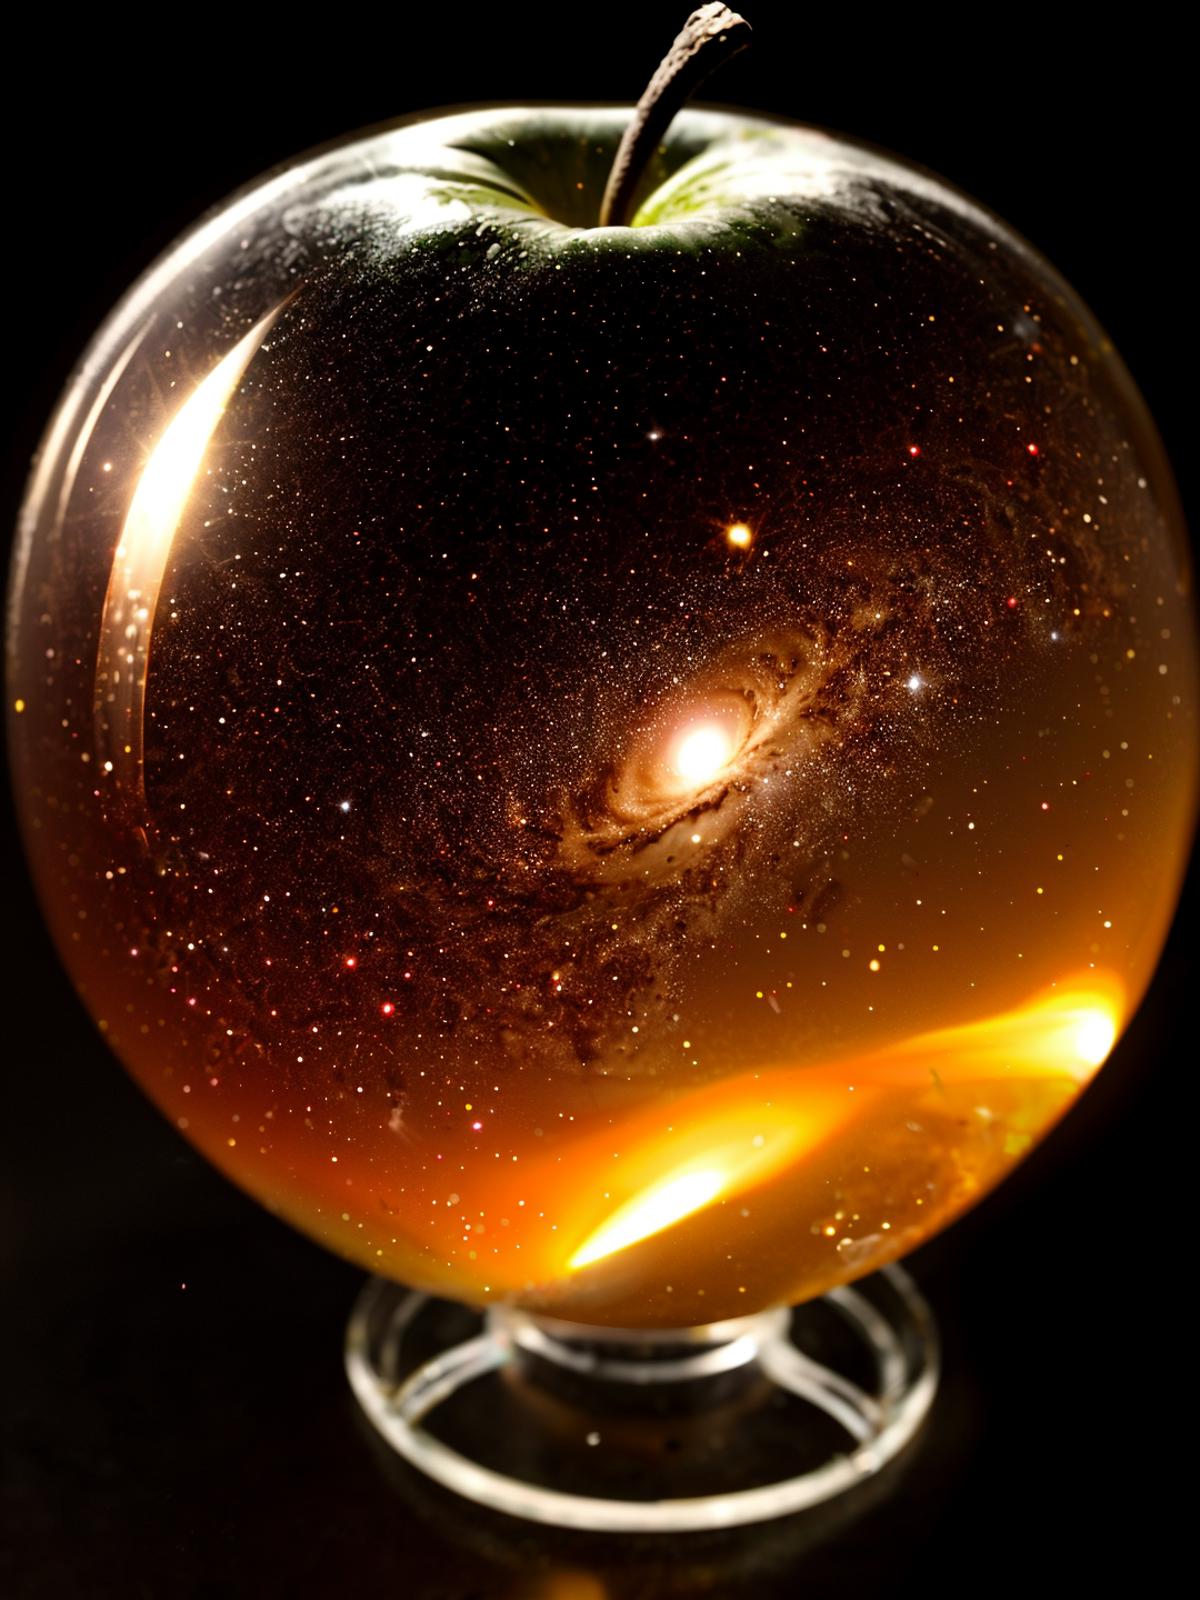 Glass apple with the galaxy inside, sitting on a glass stand.